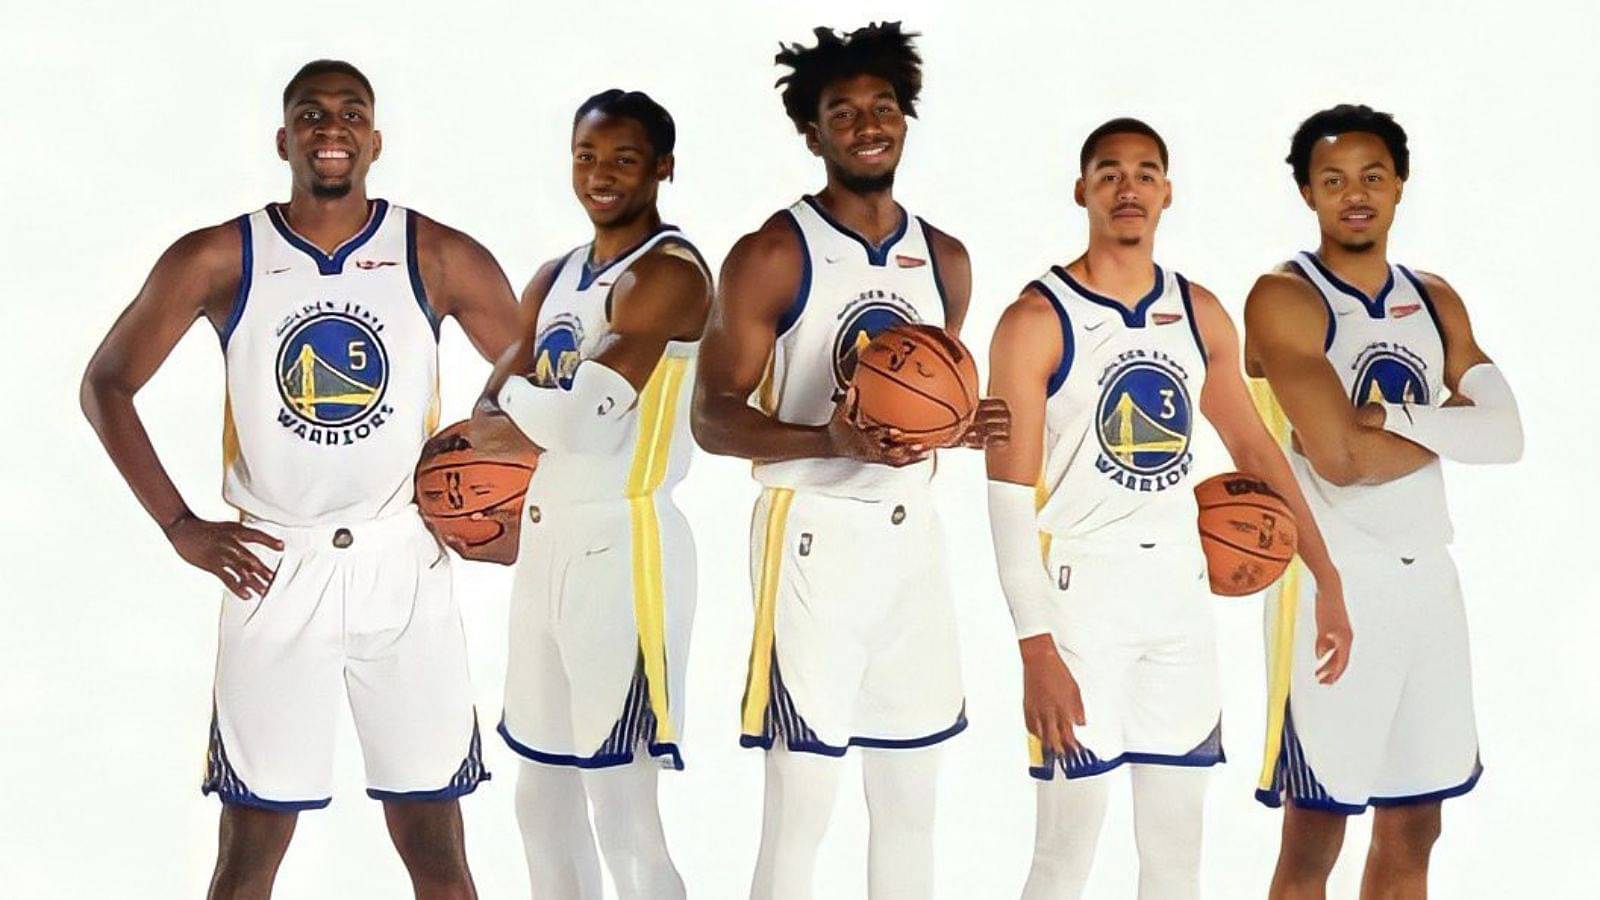 “Jordan Poole an All-Star, Kuminga an all-defensive player, and Wiseman - MVP candidate”: Stephen Curry’s dream for the next five years of the Warriors was not far fetched